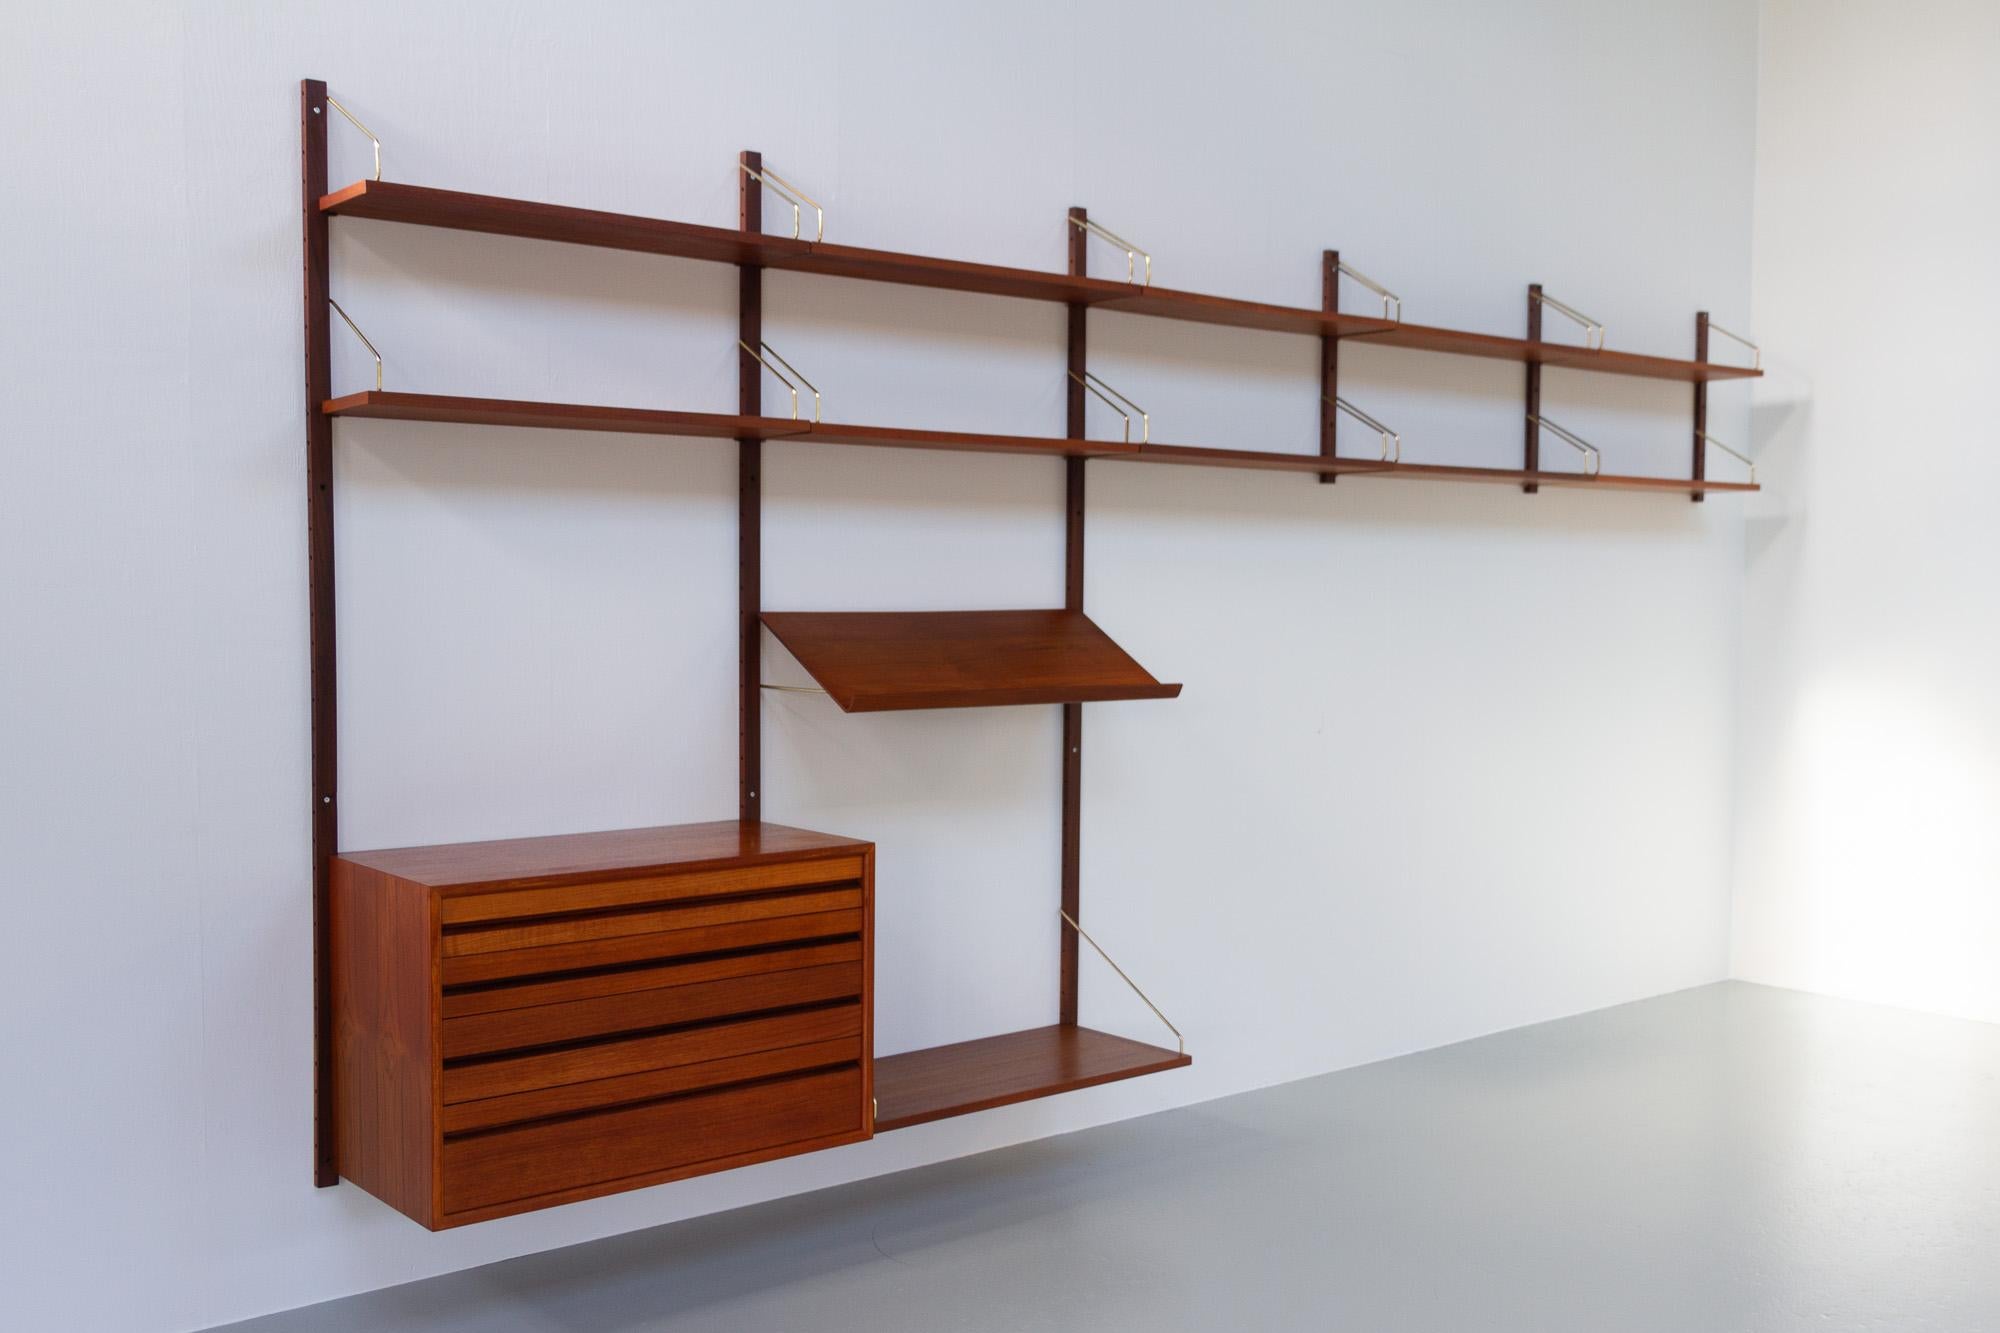 Vintage Danish teak wall unit by Poul Cadovius for Cado, 1960s.

Mid-Century Modern 5 bay shelving system model Royal. This is a original vintage floating bookcase designed in 1948 by Danish architect Poul Cadovius. 
Cadovius had the revolutionary